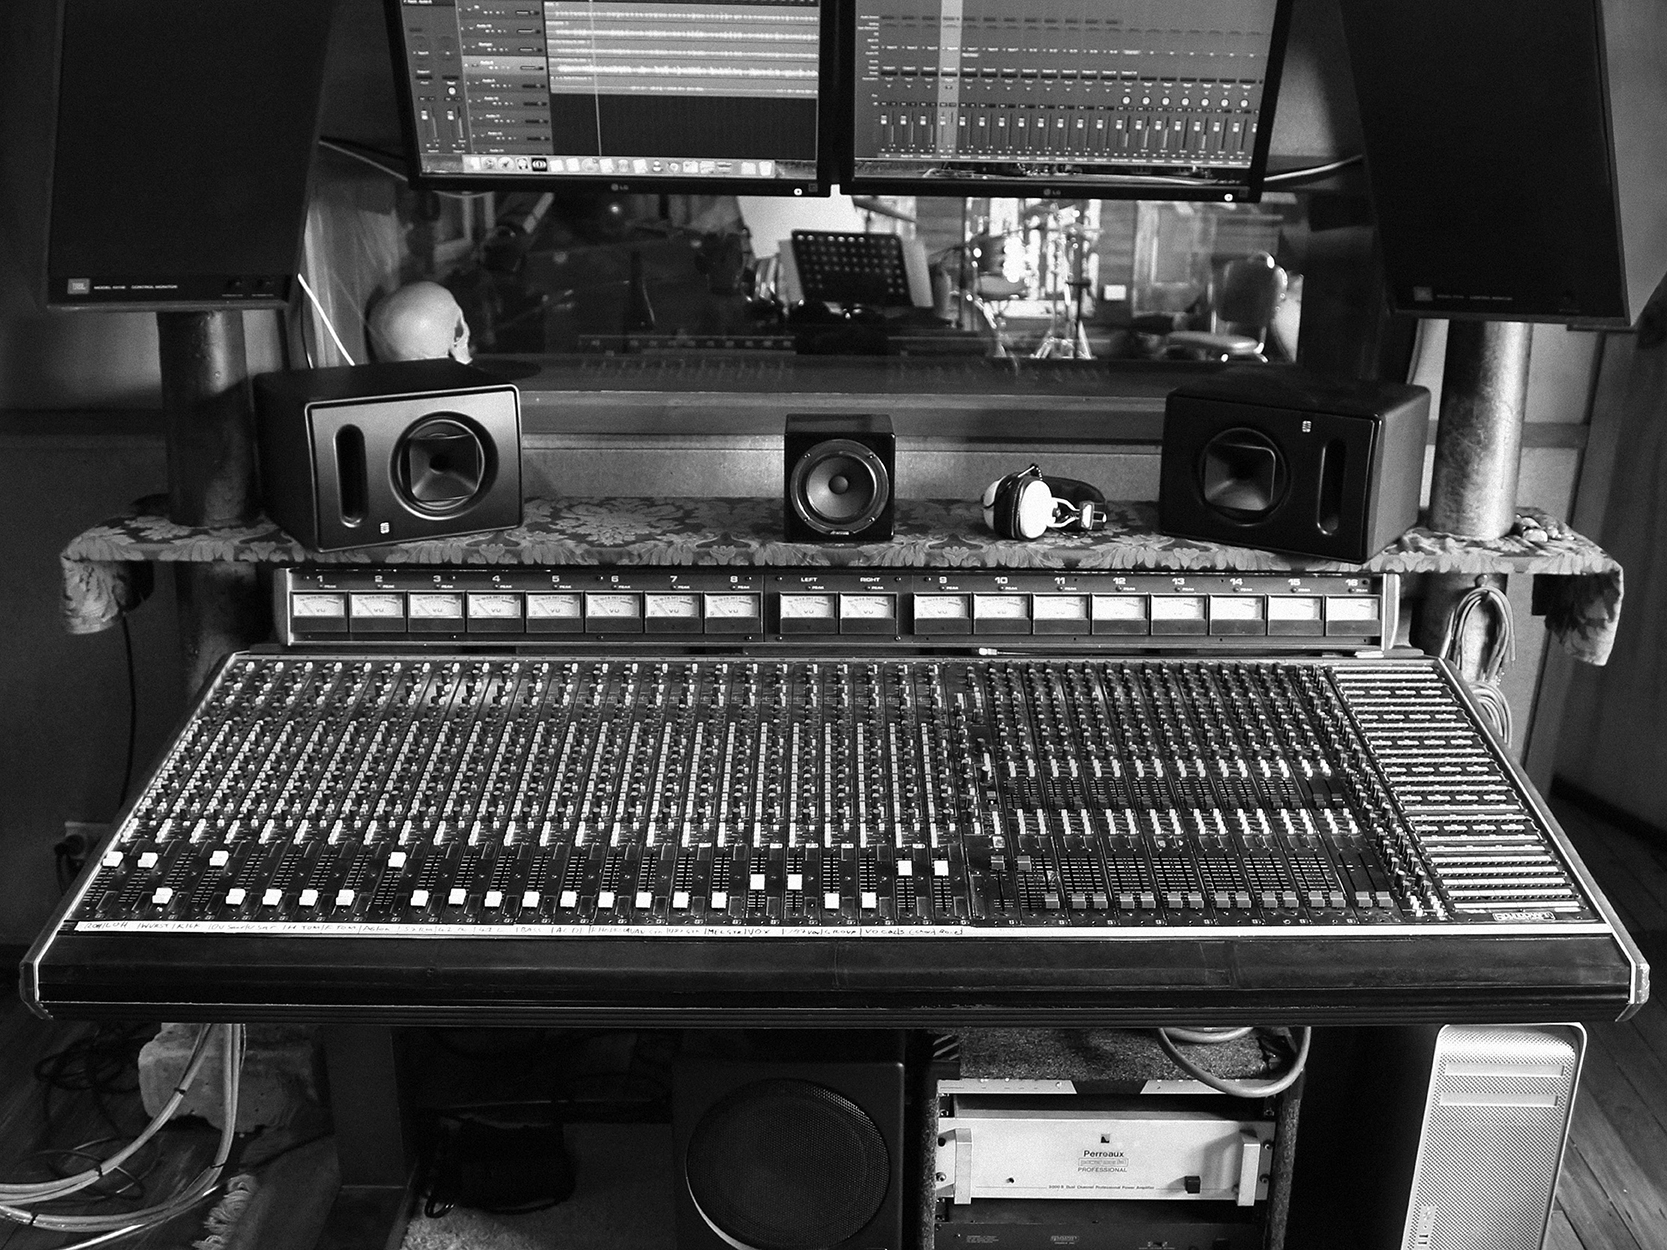 Sublime Studio control room with Neve mixing desk